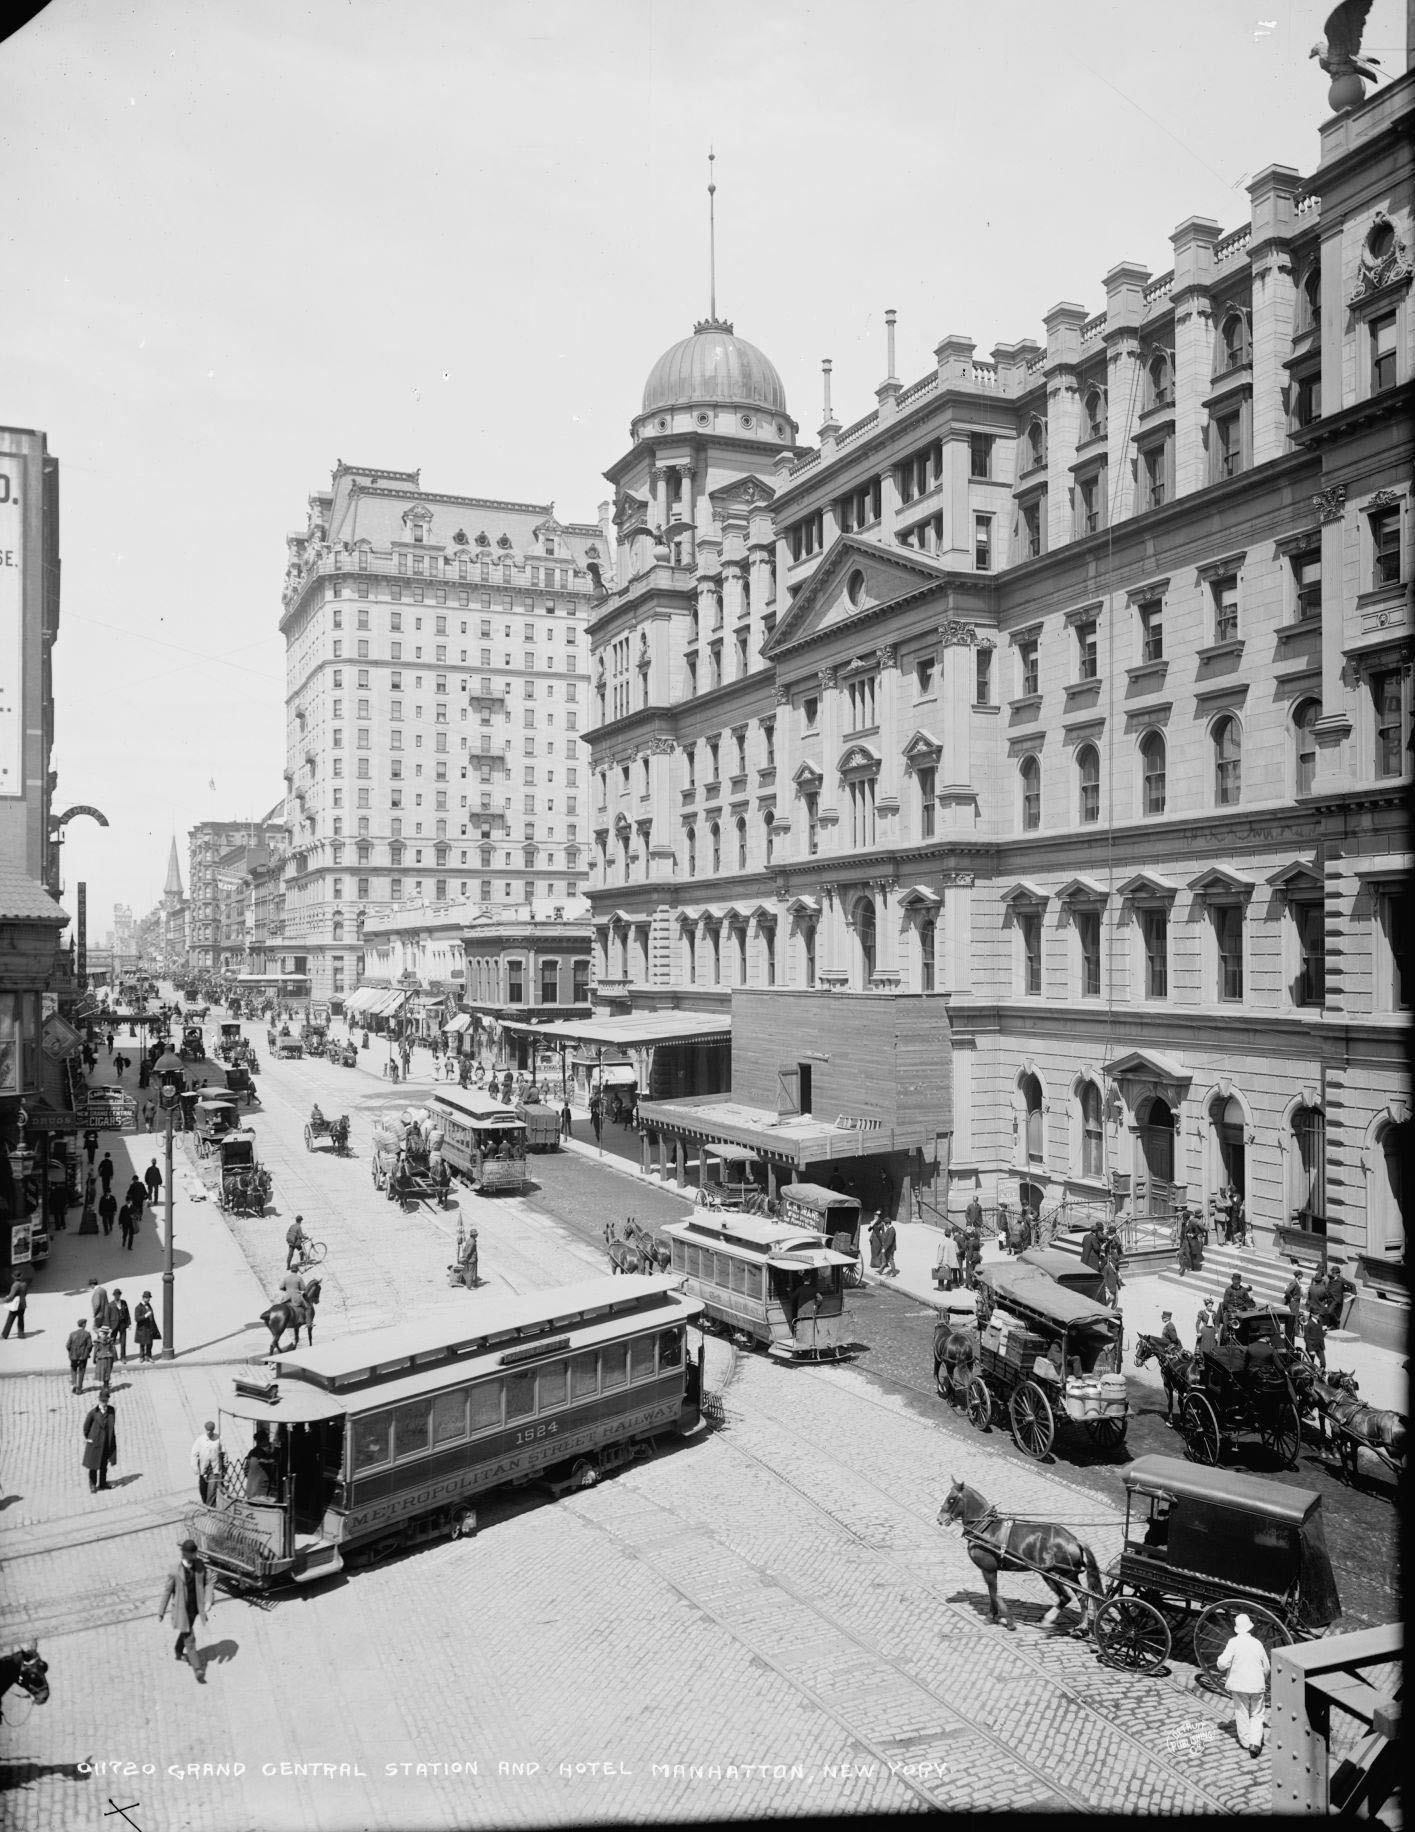 Grand Central Station And Hotel Manhattan, New York City, 1906